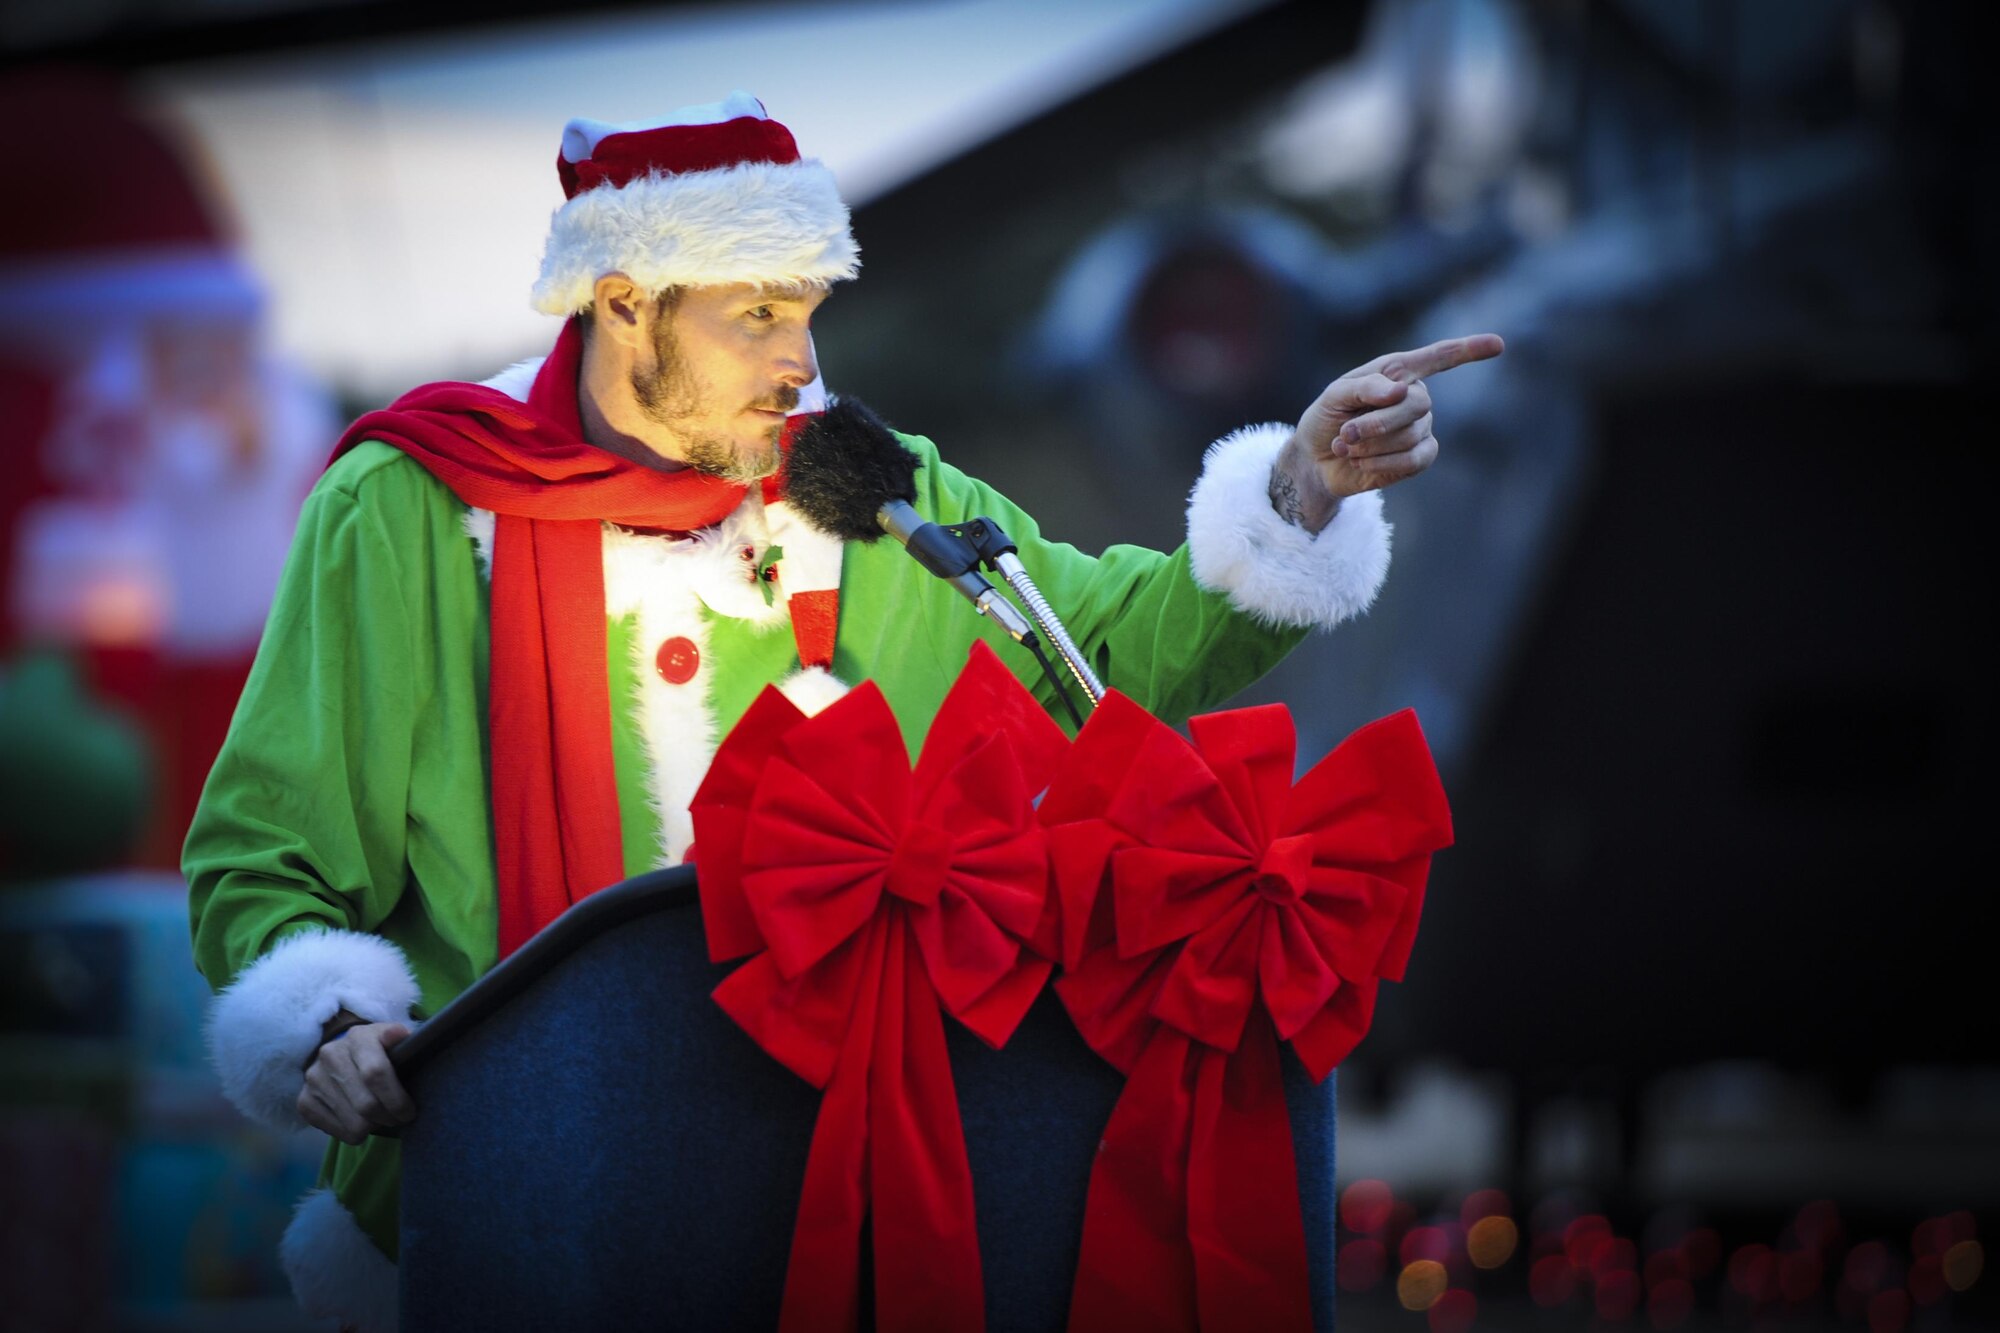 Robert Scott, the community center director with the 1st Special Operations Force Support Squadron, speaks during the Christmas tree lighting ceremony at Hurlburt Field, Fla., Dec. 2, 2016. Hurlburt Field invited Air Commandos and families to celebrate the holiday season with a ceremony including lighting a Christmas tree, pinning yellow ribbons on a wreath and a visit from Santa Claus. (U.S. Air Force photo by Airman Dennis Spain)